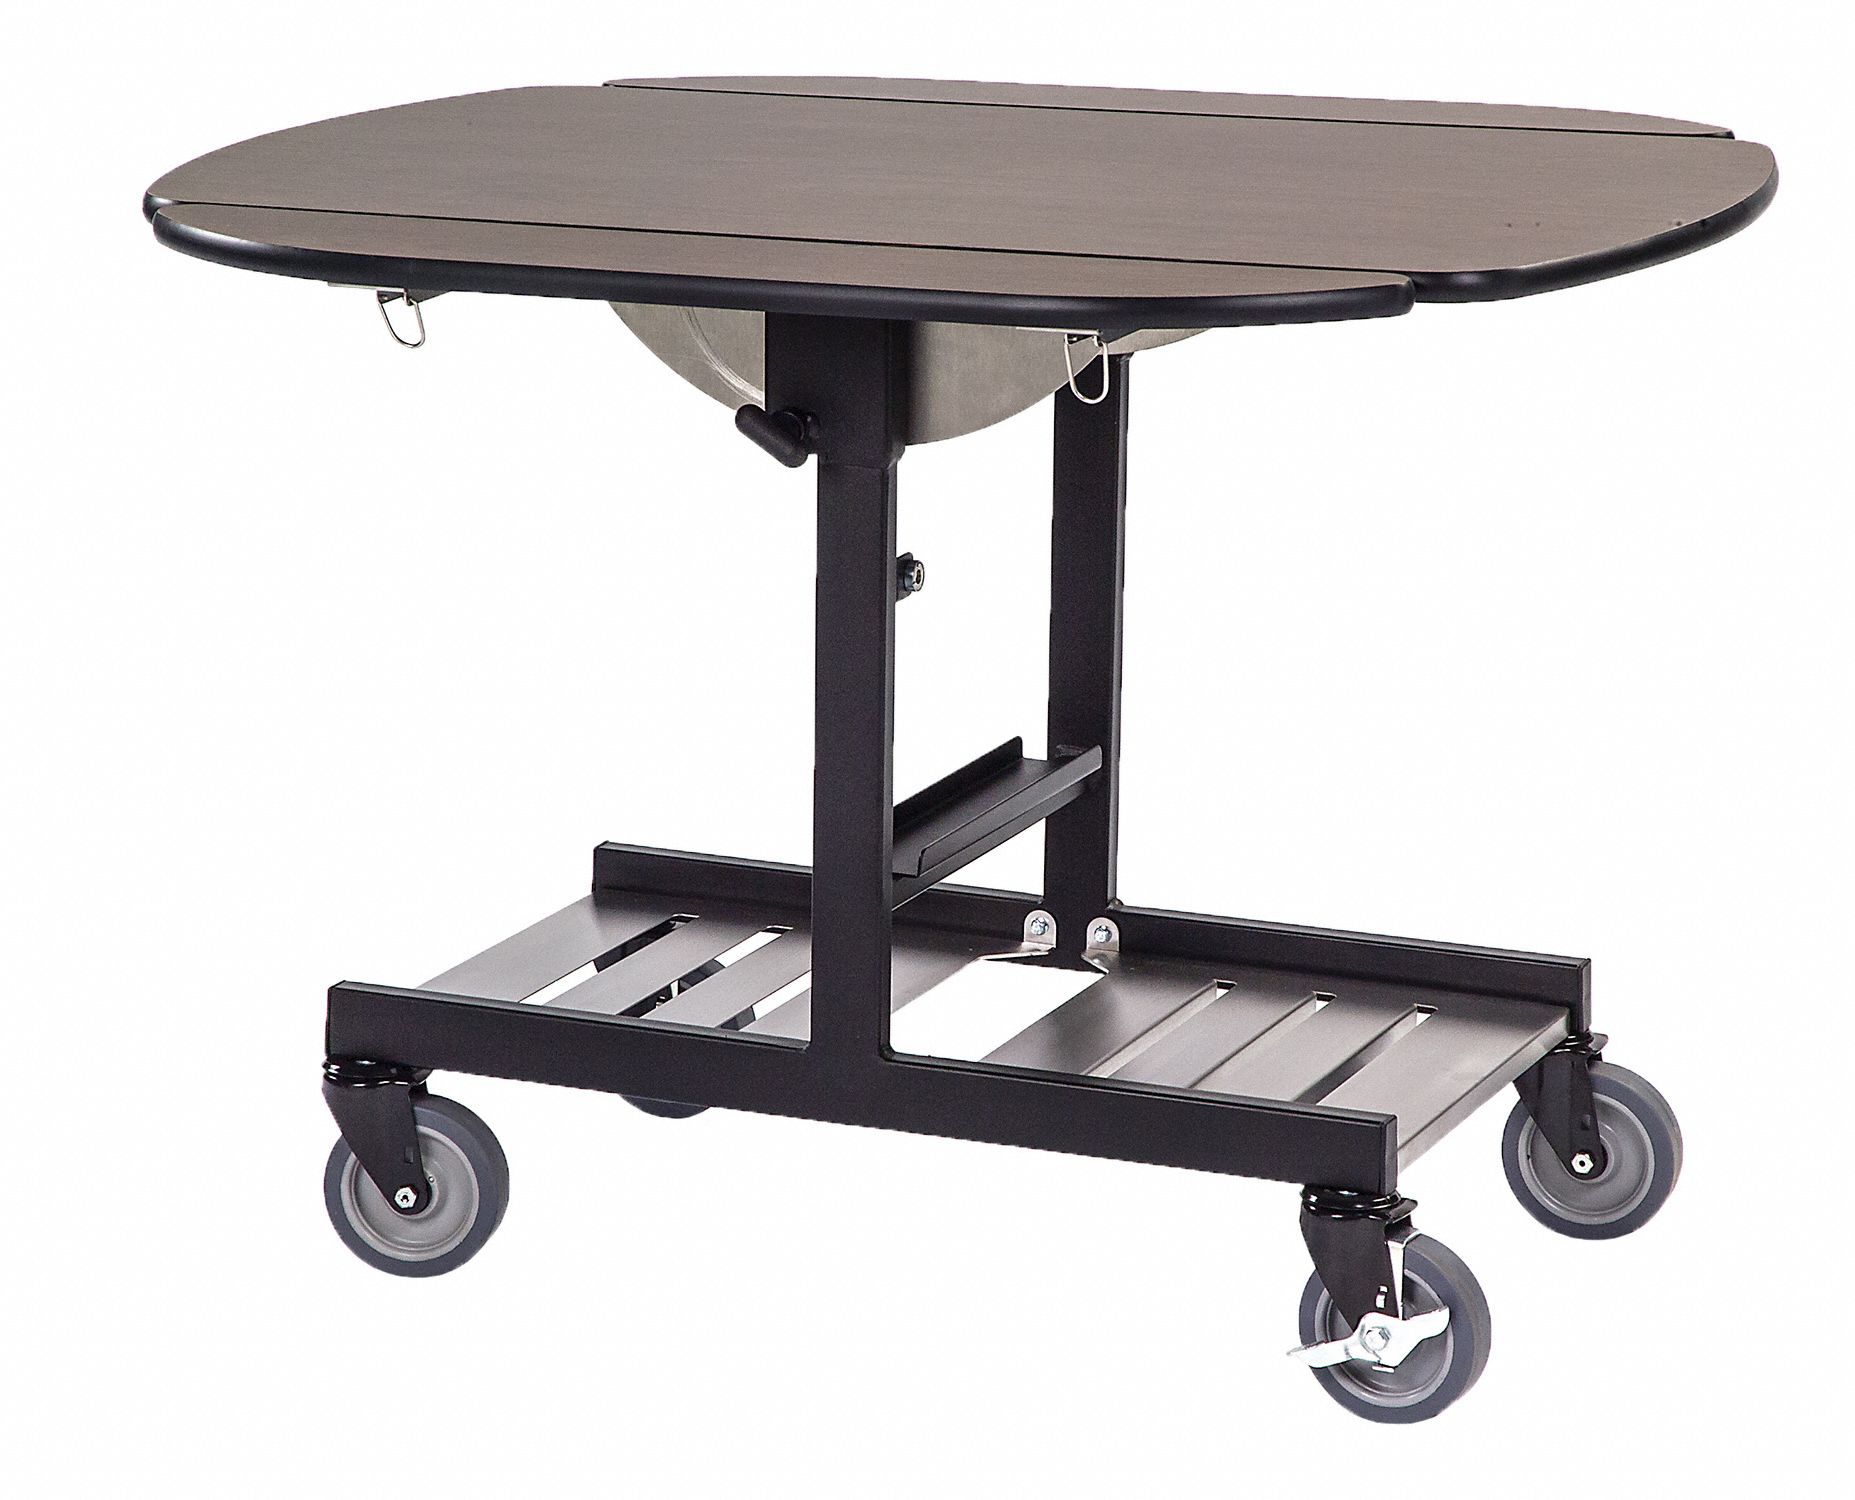 Tri-Fold Room Service Table: Oval, 31 in Overall Ht, 36 in Overall Lg, 36 in Overall Wd